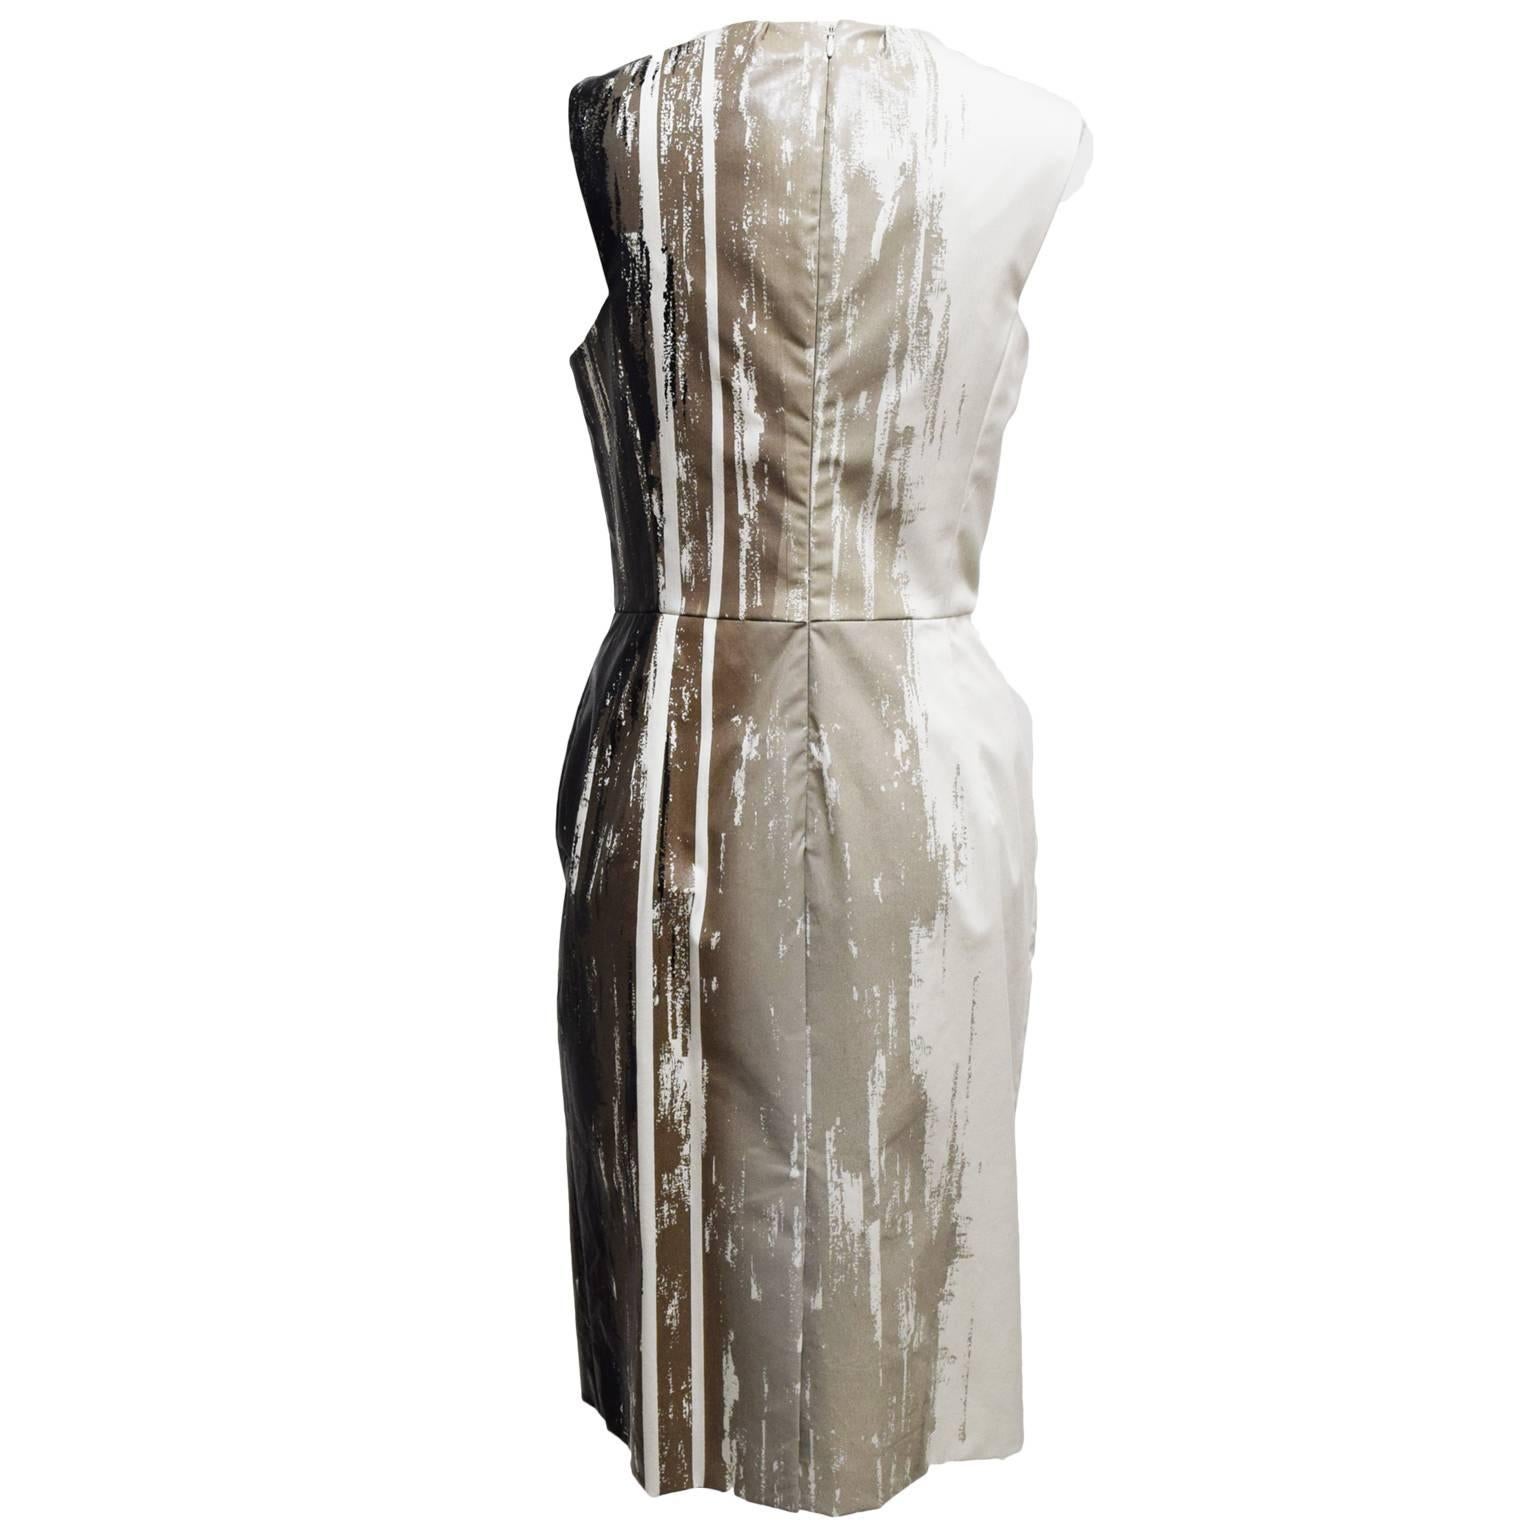 This one of a kind dress by Jason Wu is a cotton, spandex blend and is fully lined in silk. The dress has abstract painted stripe details with a high waistline and a frontal panel. 